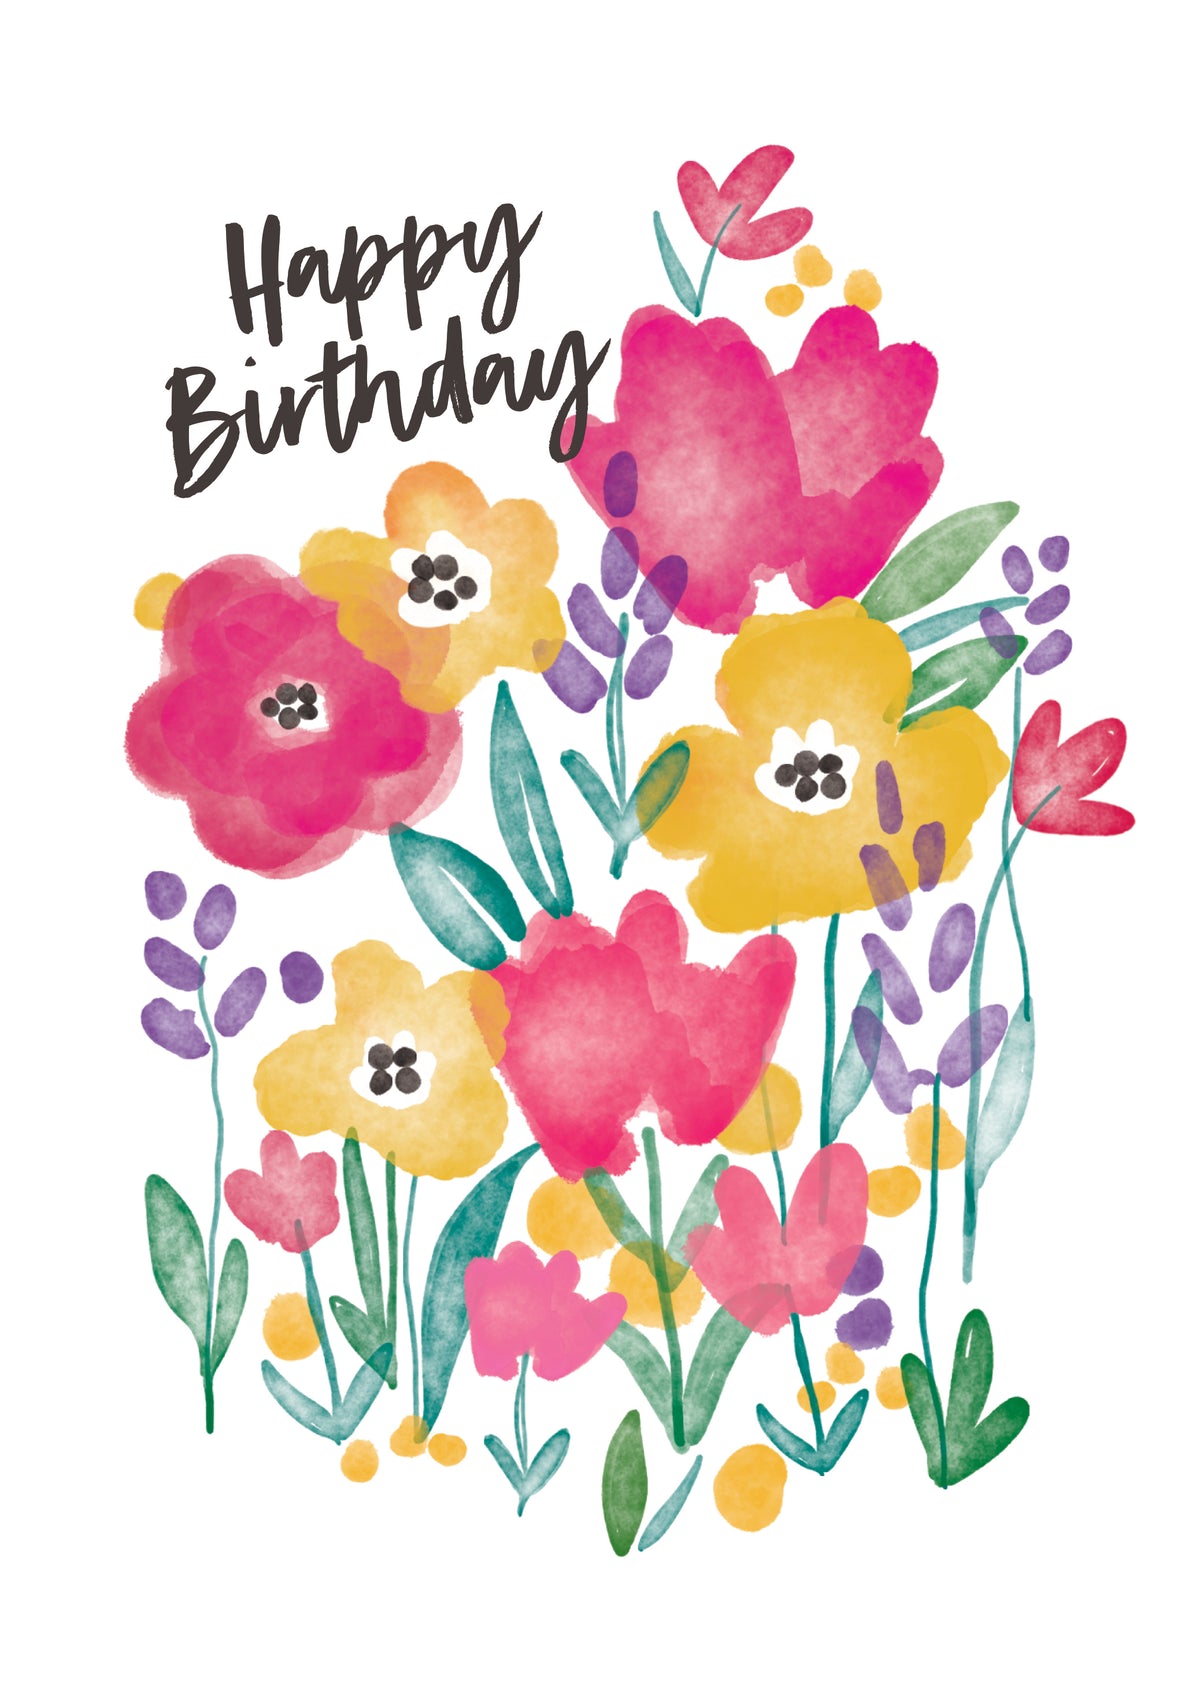 A greetings card with a white background and colourful watercolour style flowers. The words happy birthday are written on the top left in black script.